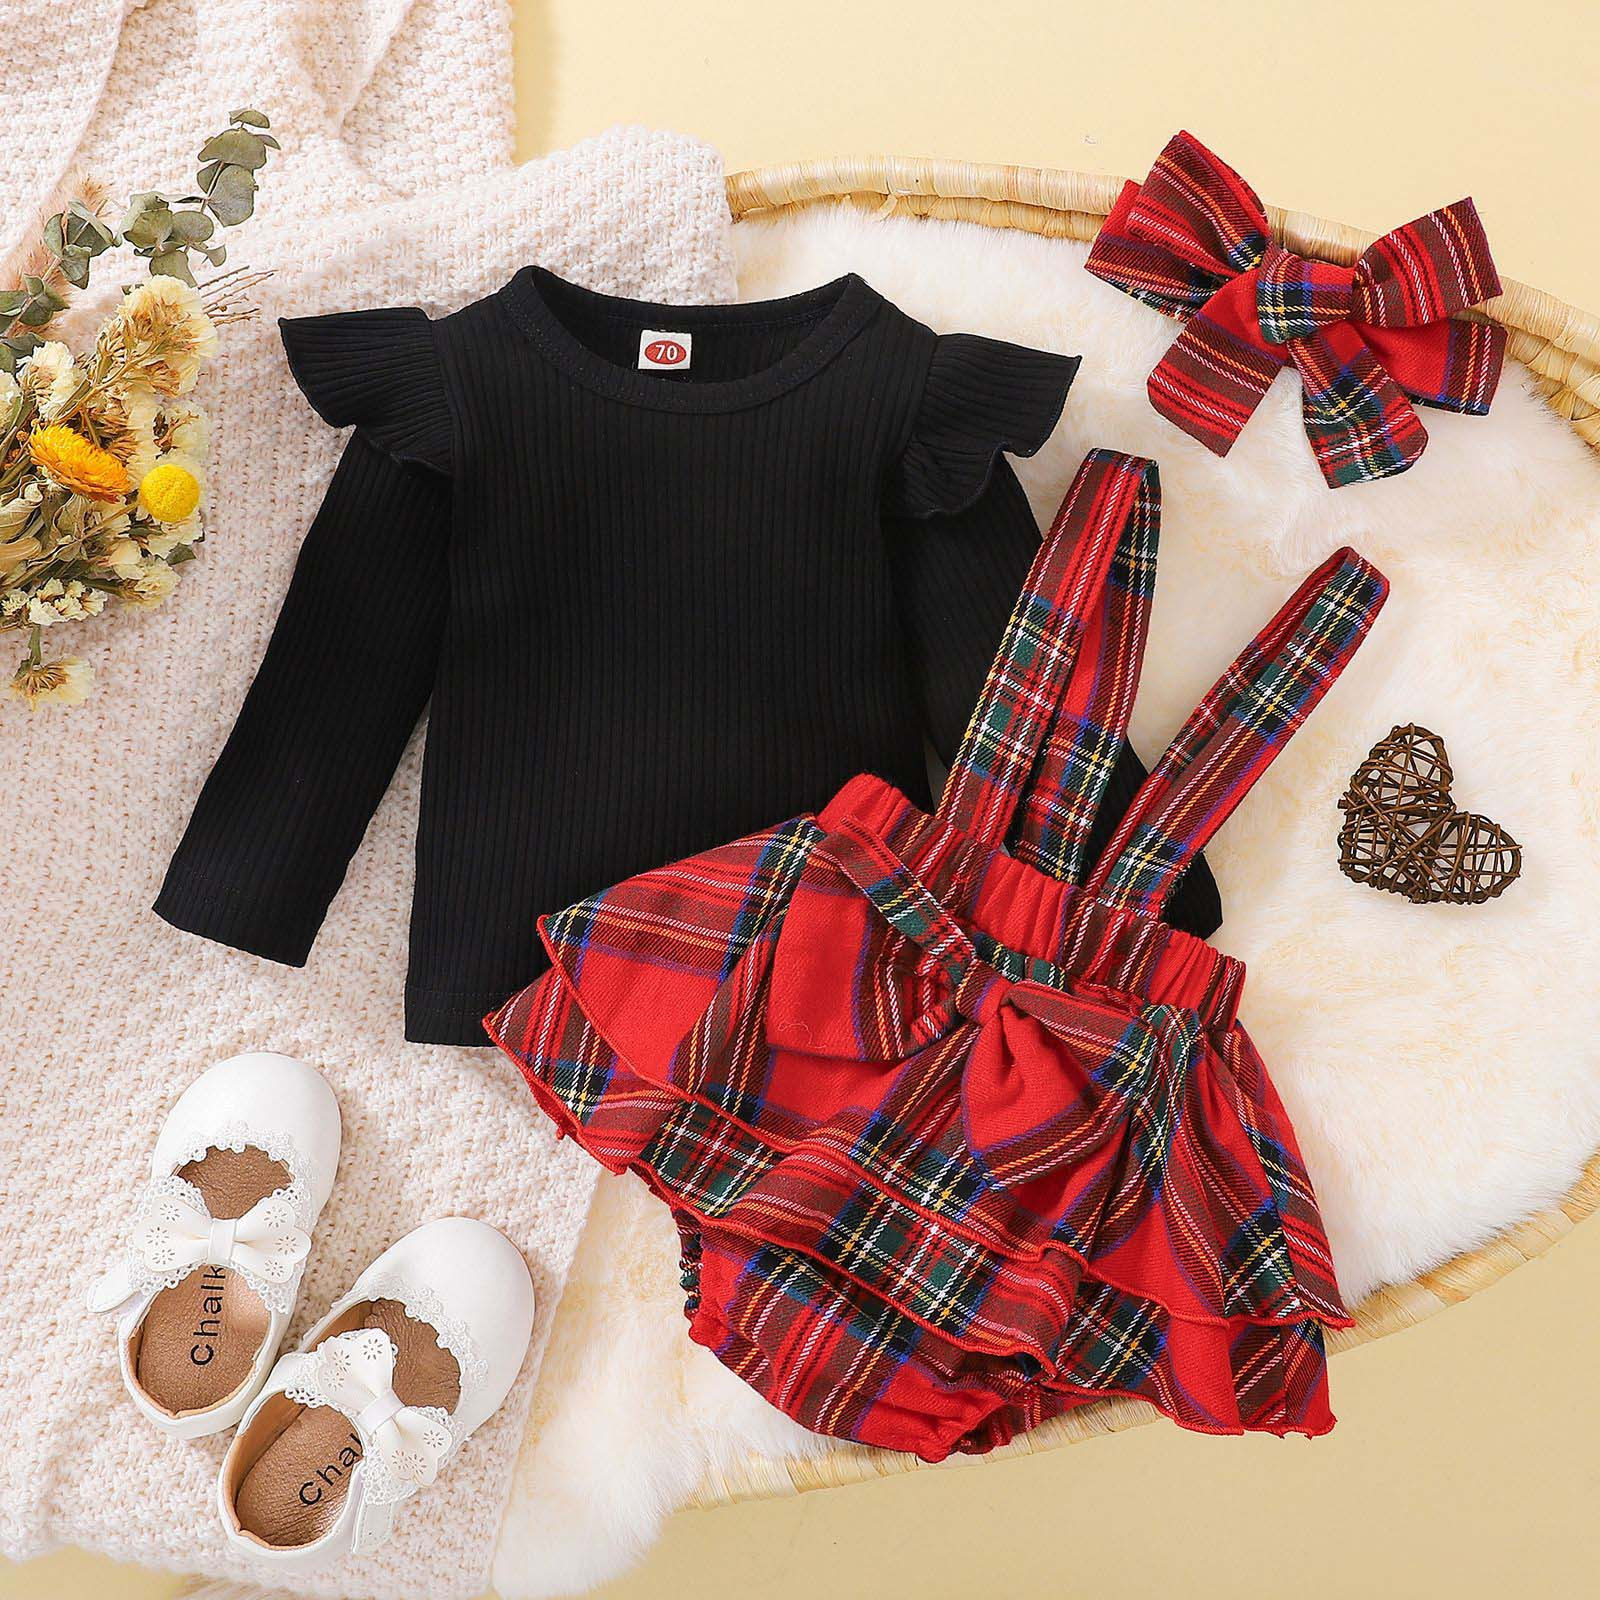 ZCFZJW Toddler Baby Girl Outfits Ruffle Long Sleeve Ribbed Sweatshirt Shirt Top Buffalo Plaid Suspender Overall Skirt Headband Butterfly Knot Hairband 3 Pieces Set(Black,9-12 Months) - image 5 of 9